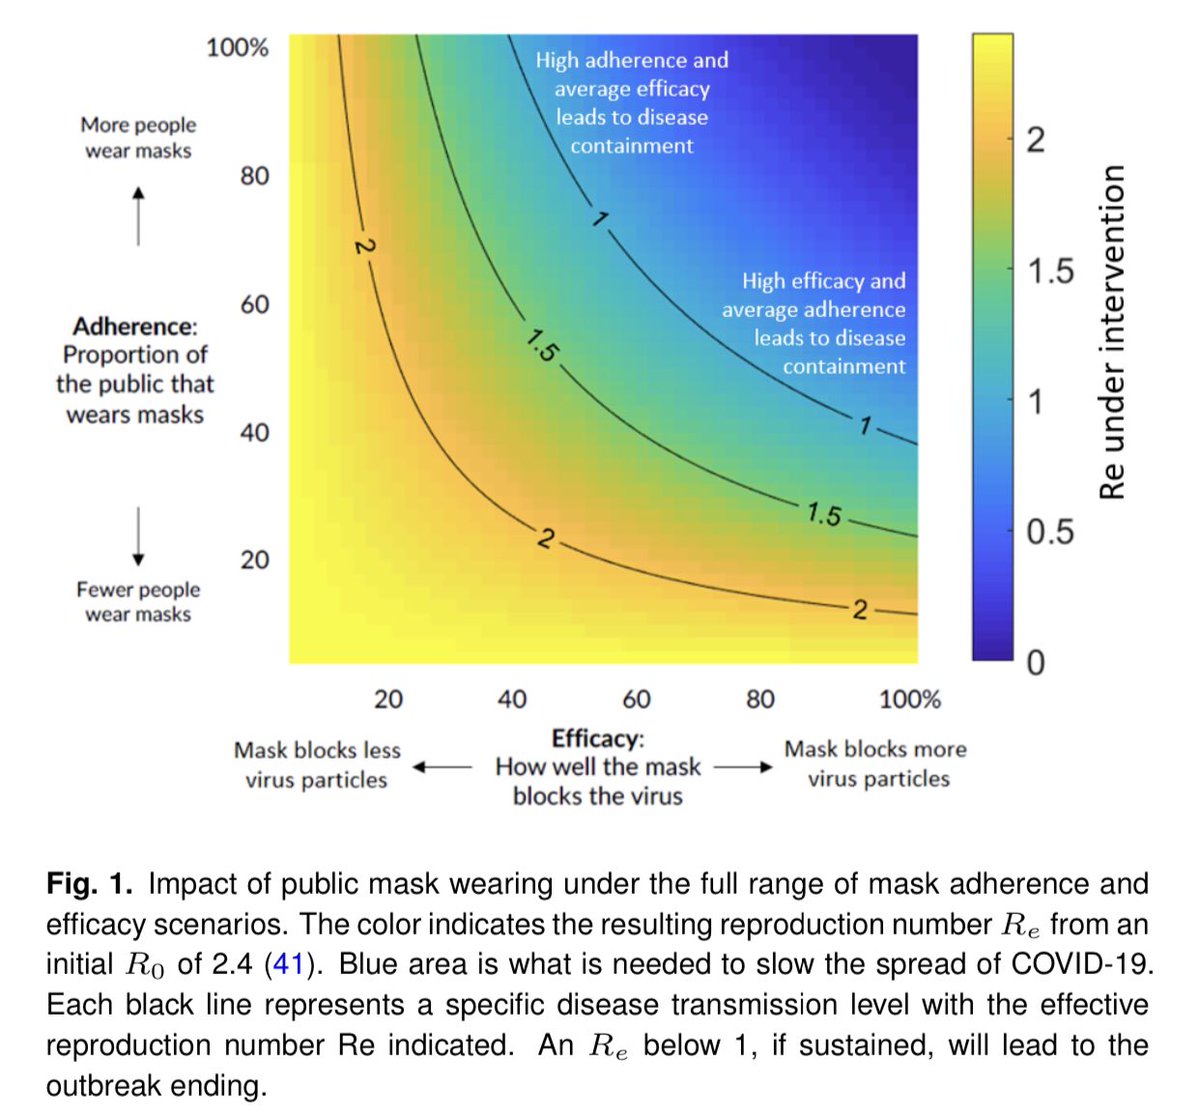 4) A big scientific evidence review study on face masks. “We recommend that public officials and governments strongly encourage the use of widespread face masks in public, including the use of appropriate regulation.”  #COVID19  https://europepmc.org/article/PPR/PPR186793